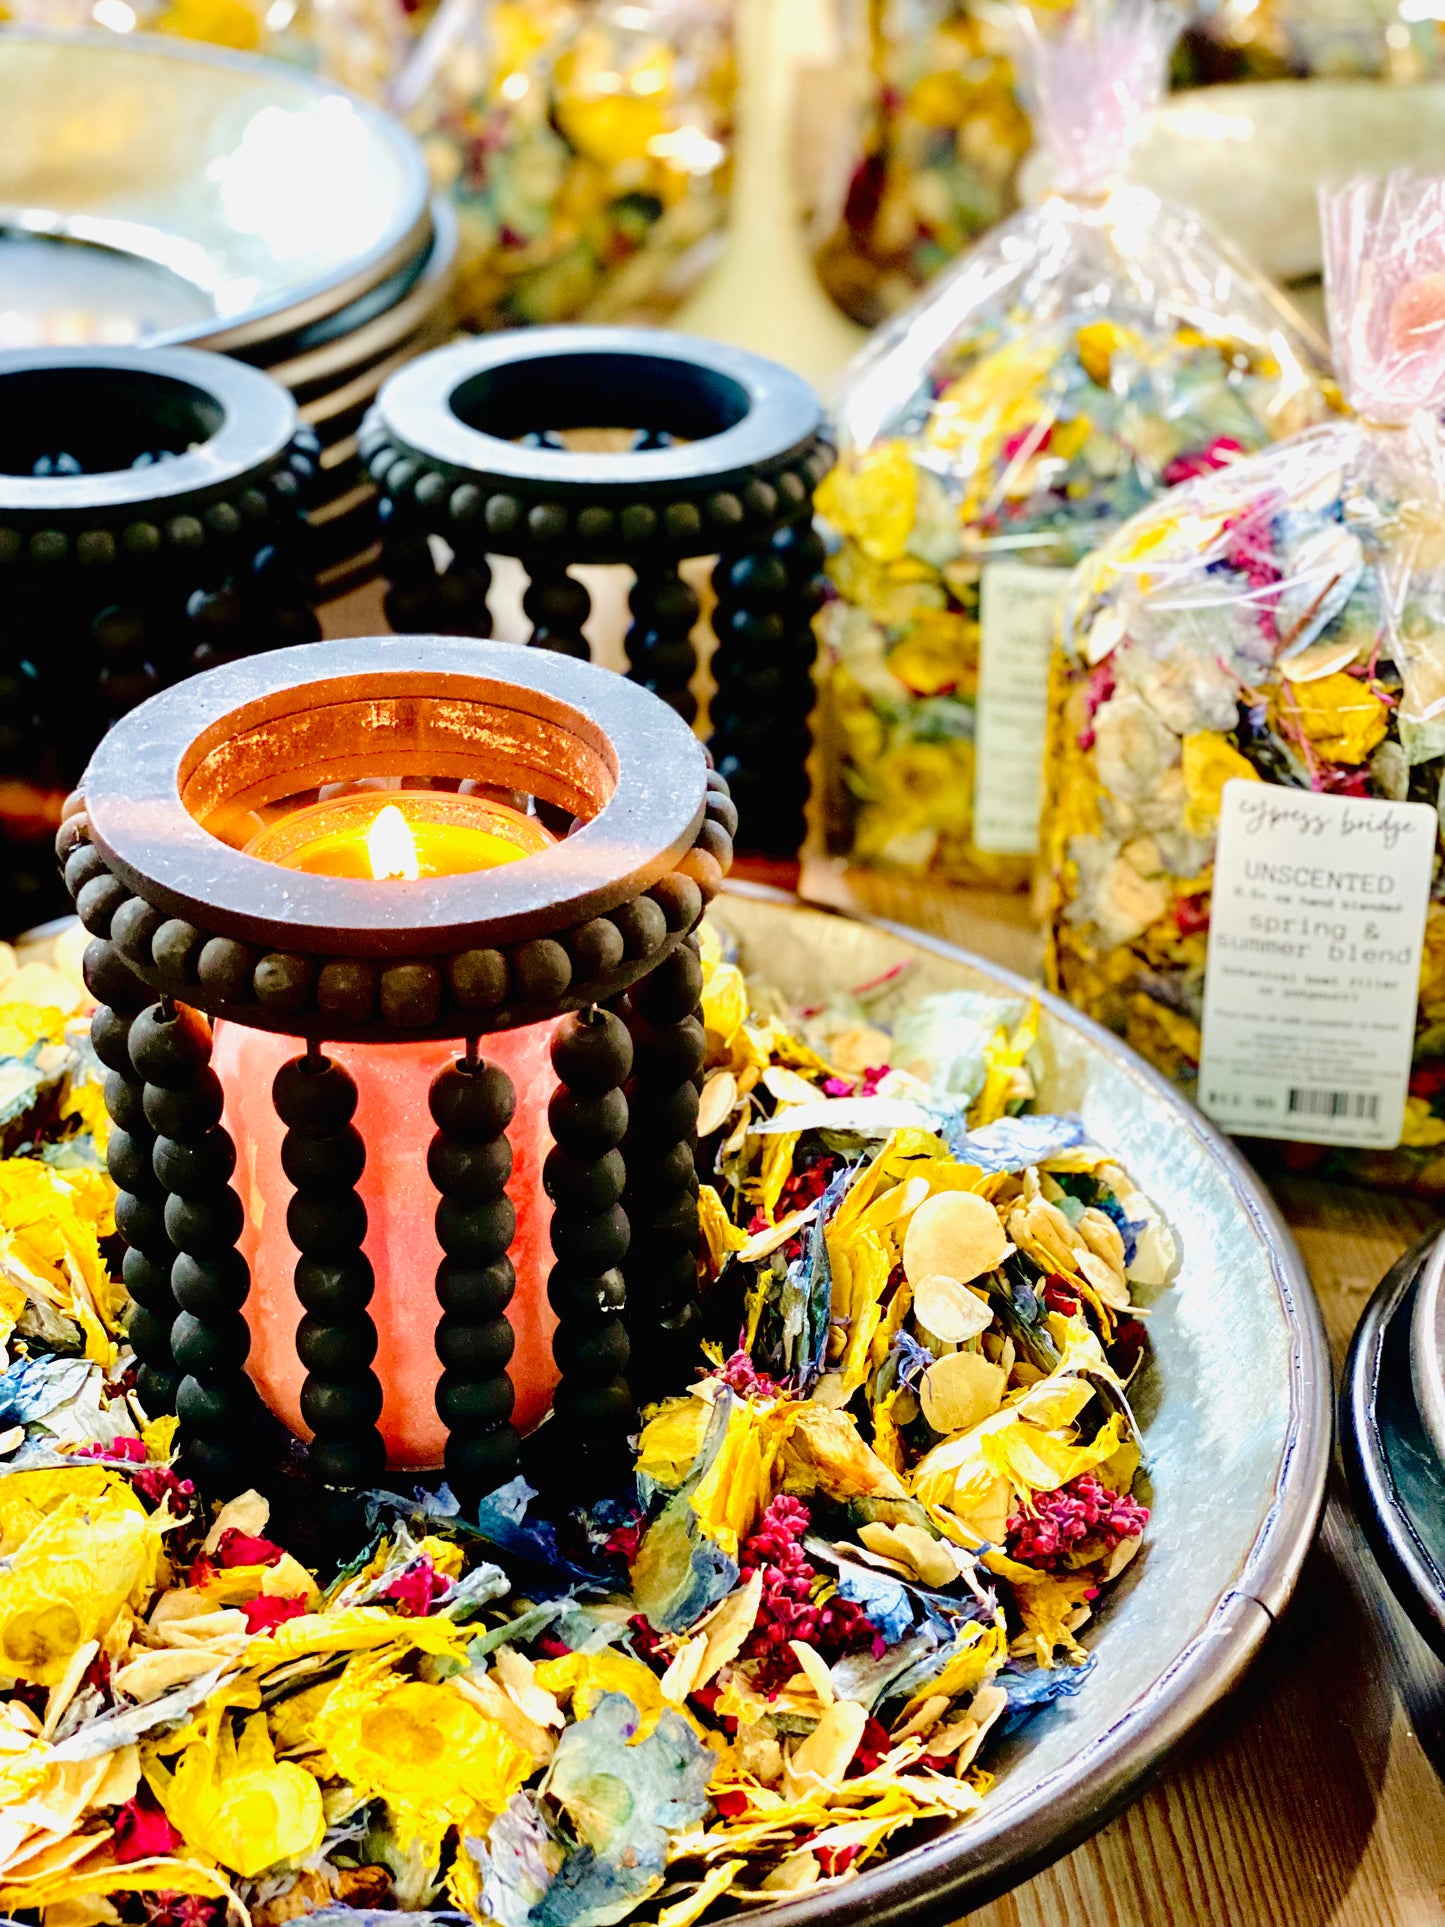 SPRING & SUMMER UNSCENTED BOTANICAL POTPOURRI - Scent YOUR way!!